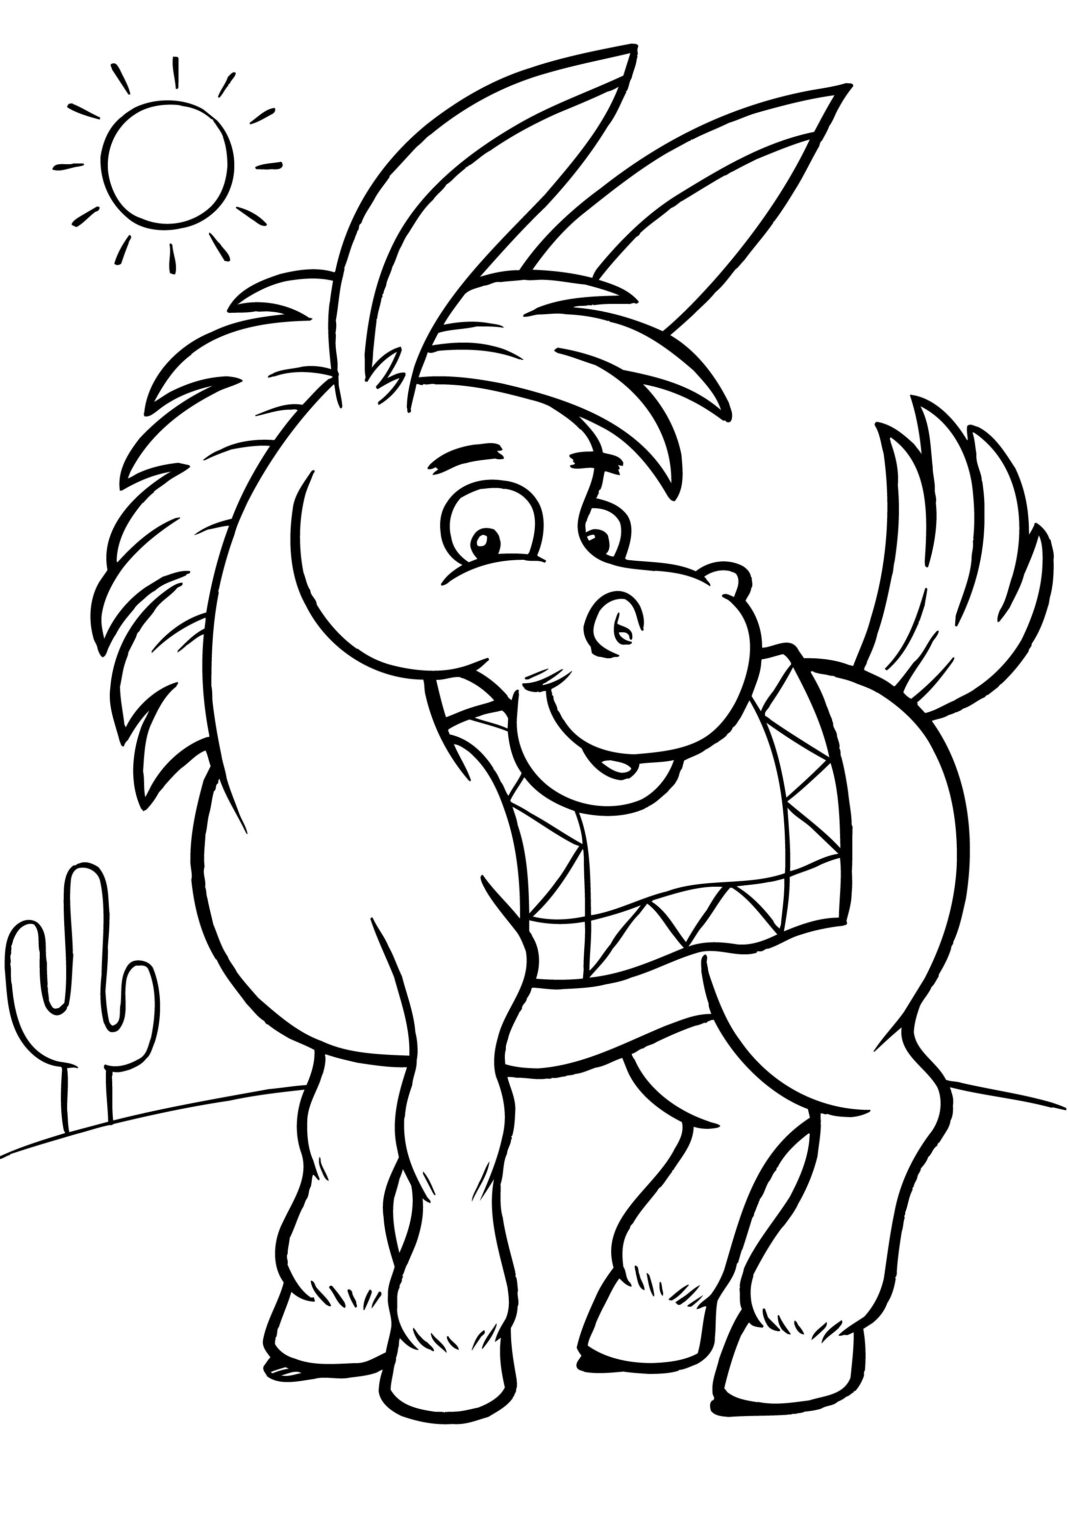 Donkey in the desert coloring book to print